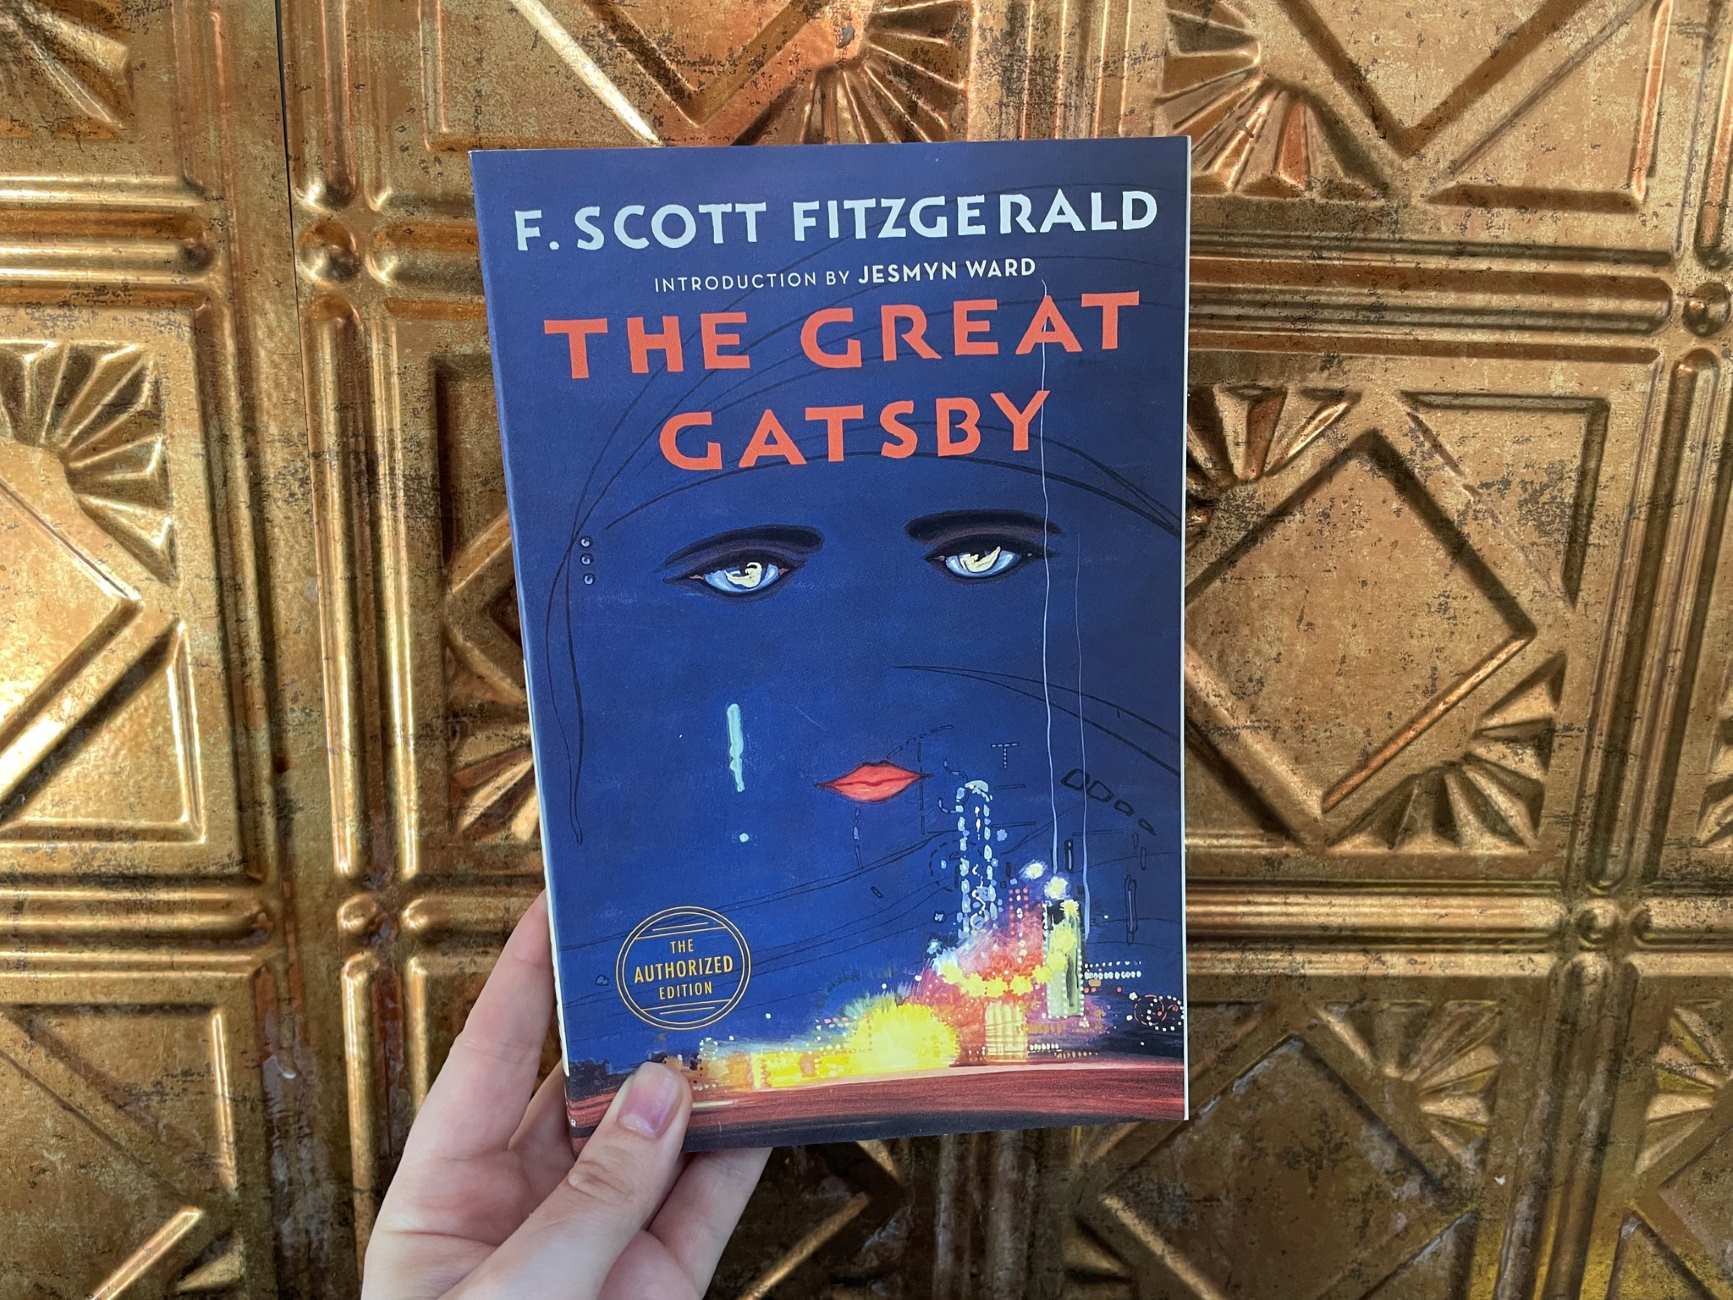 13-enigmatic-facts-about-the-great-gatsby-f-scott-fitzgerald